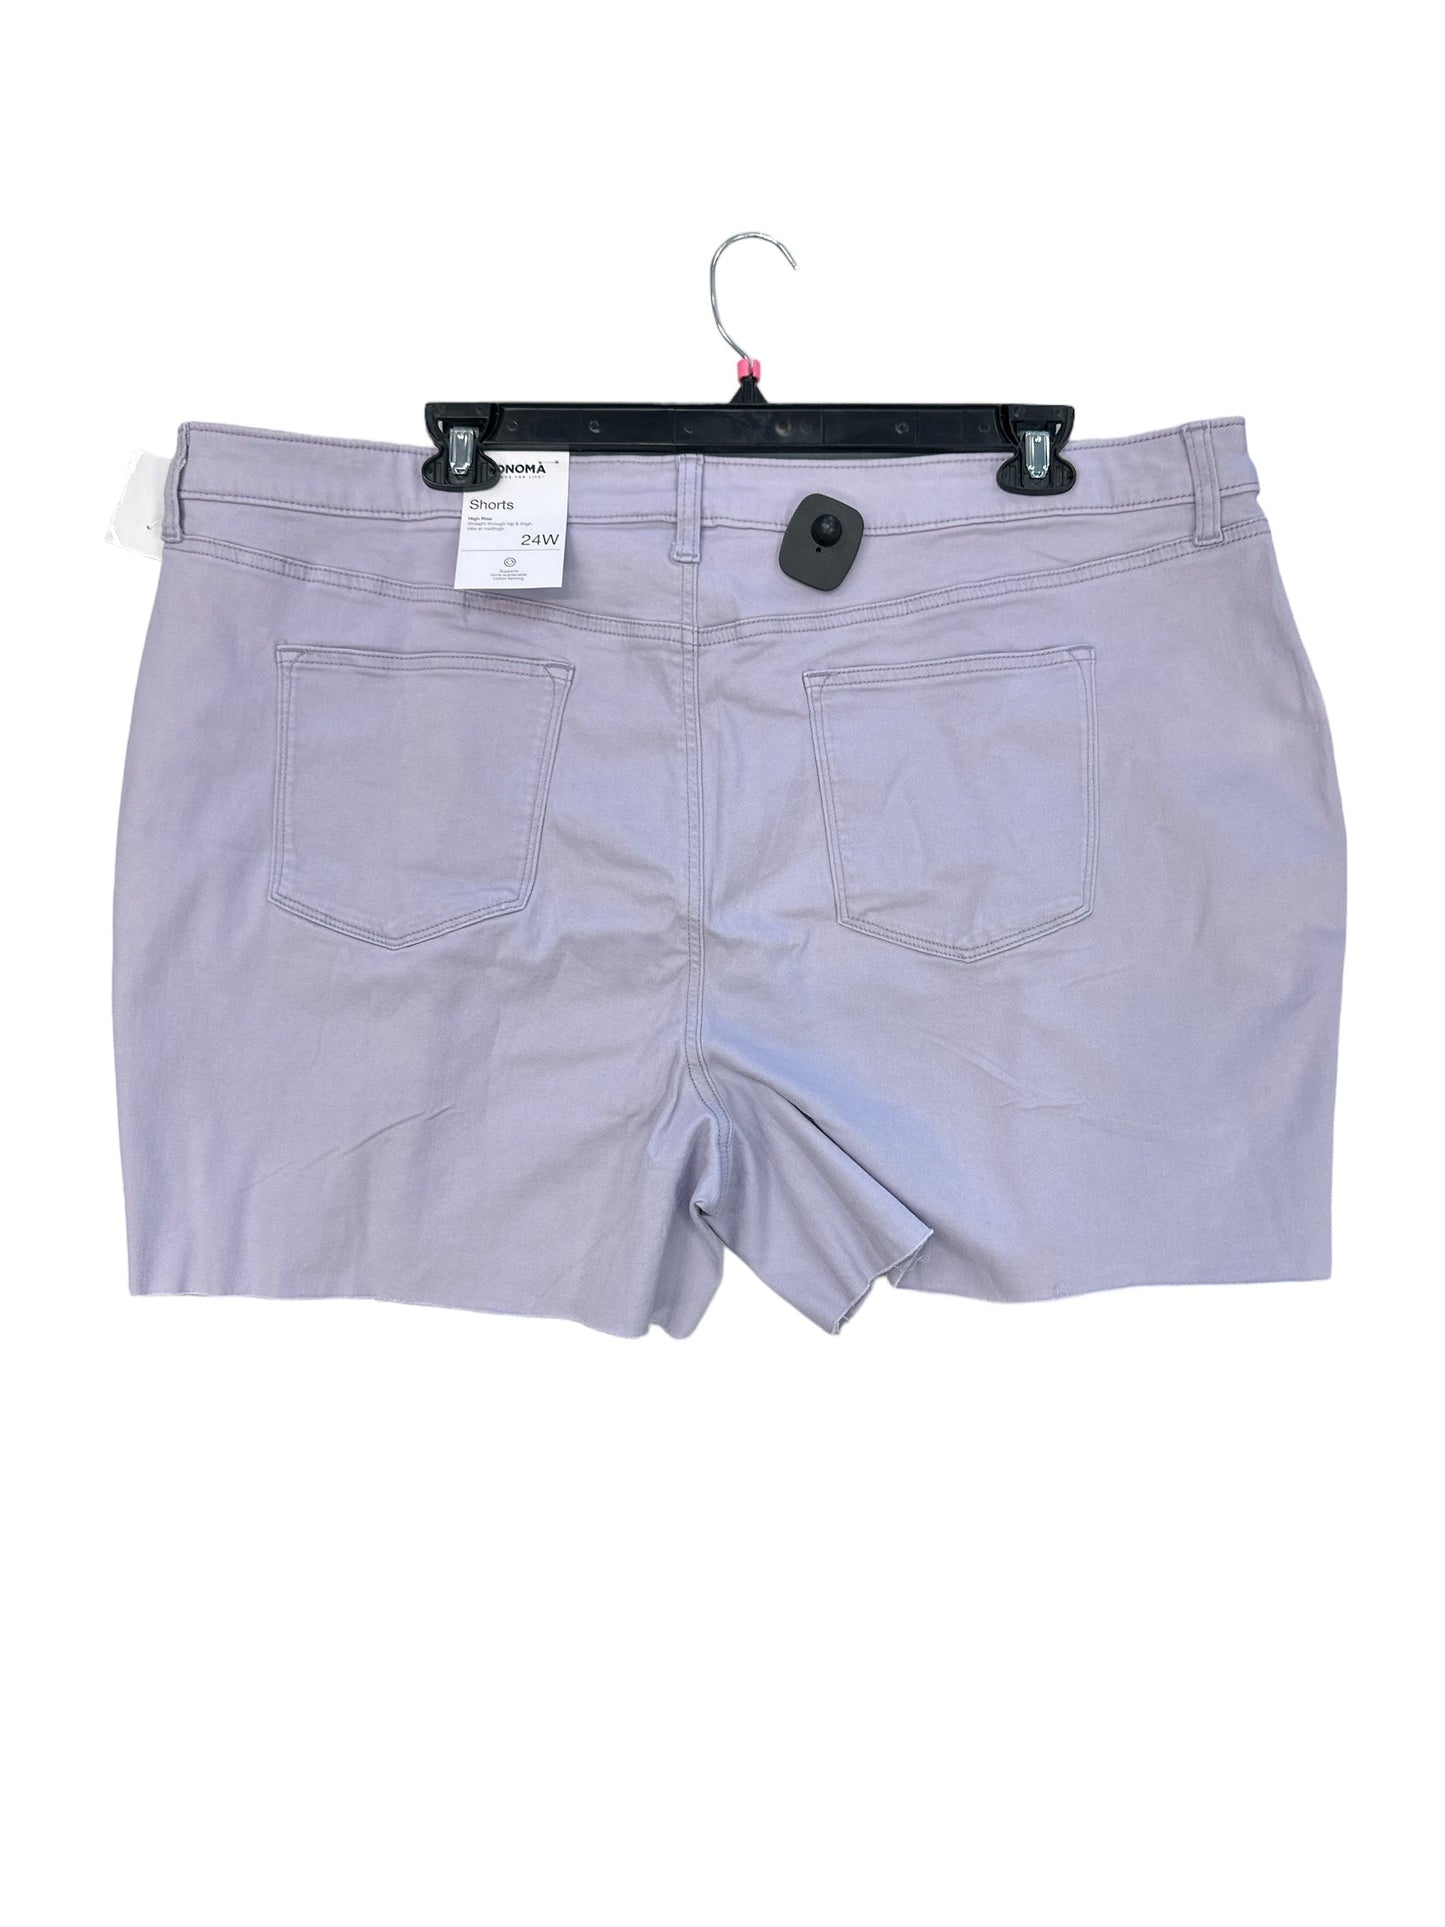 Shorts By Sonoma  Size: 24w